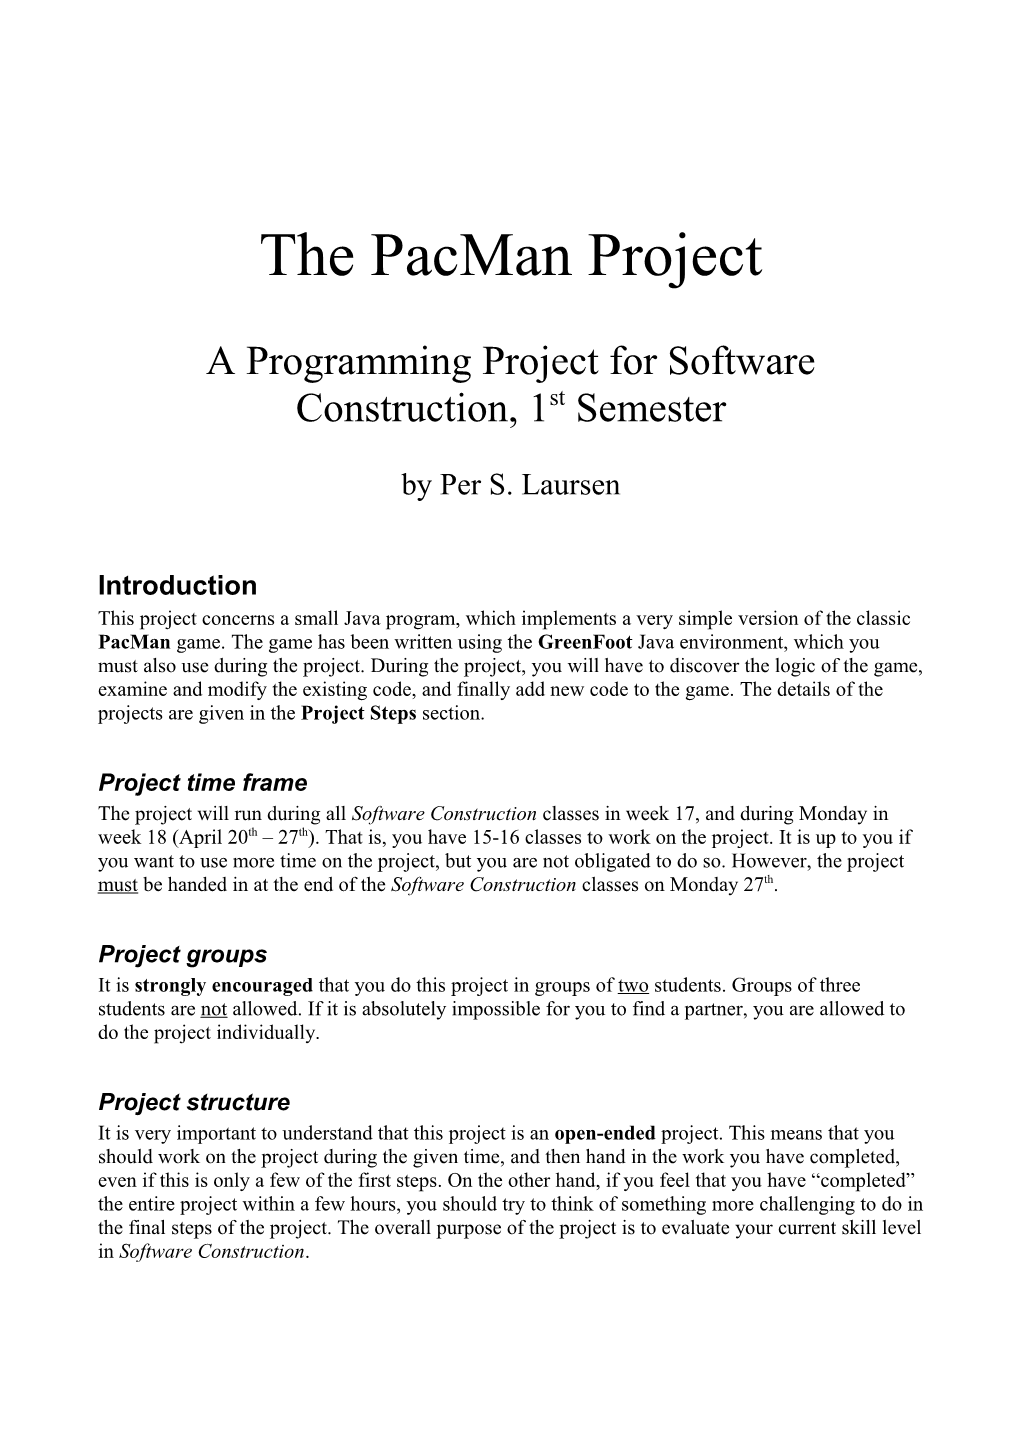 A Programming Project for Software Construction, 1Stsemester